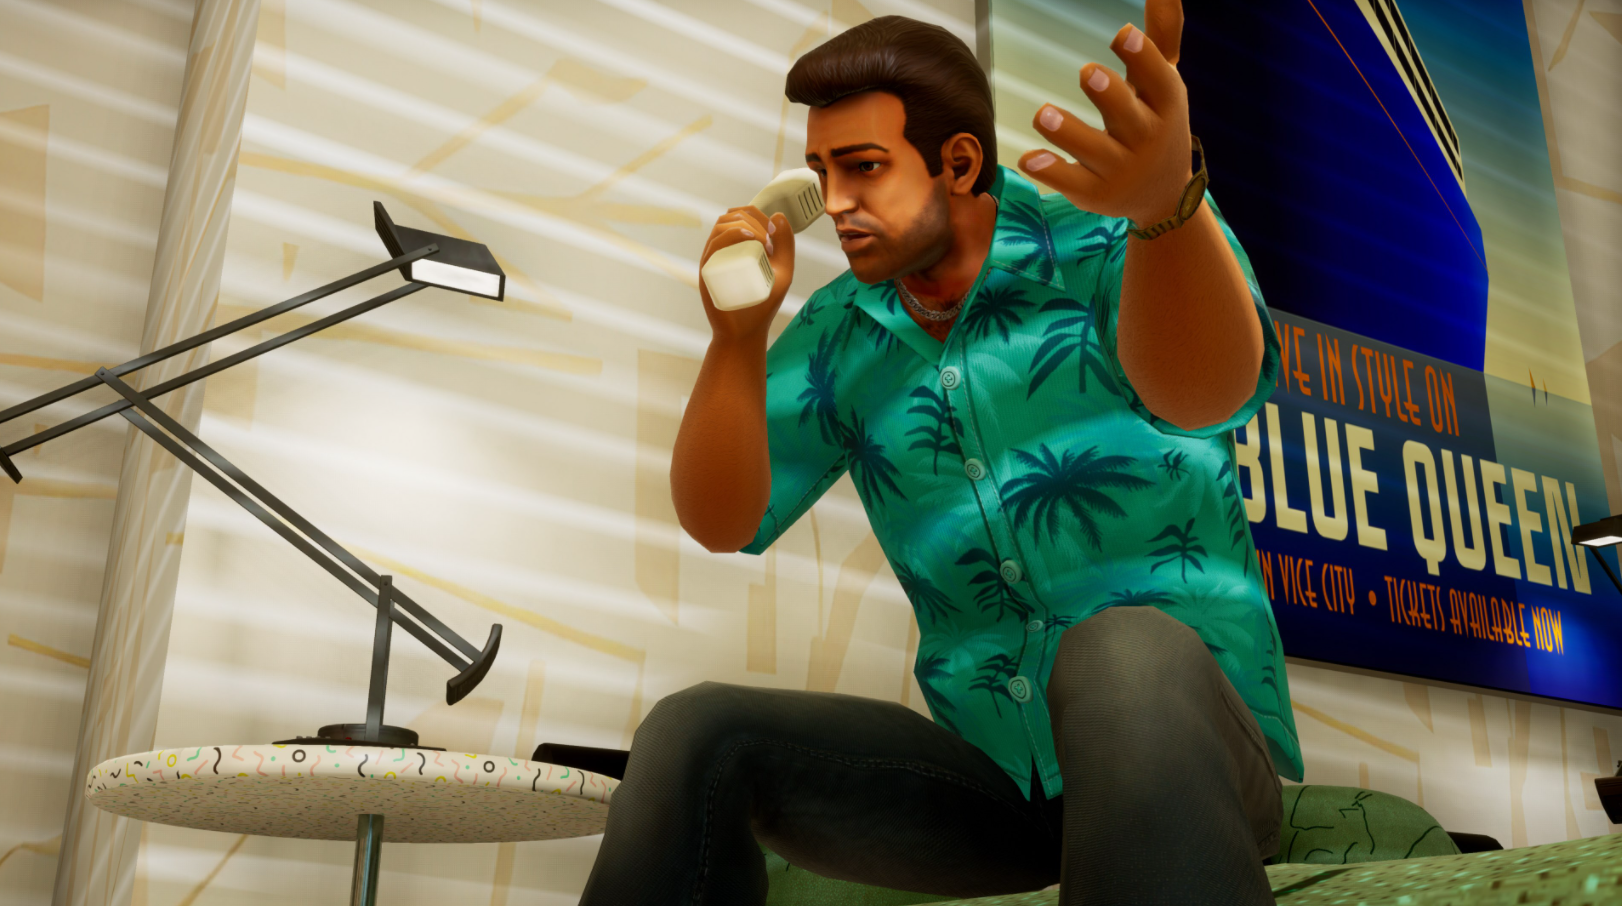 GTA Vice City Free Download for Android - Play with Cheat Codes